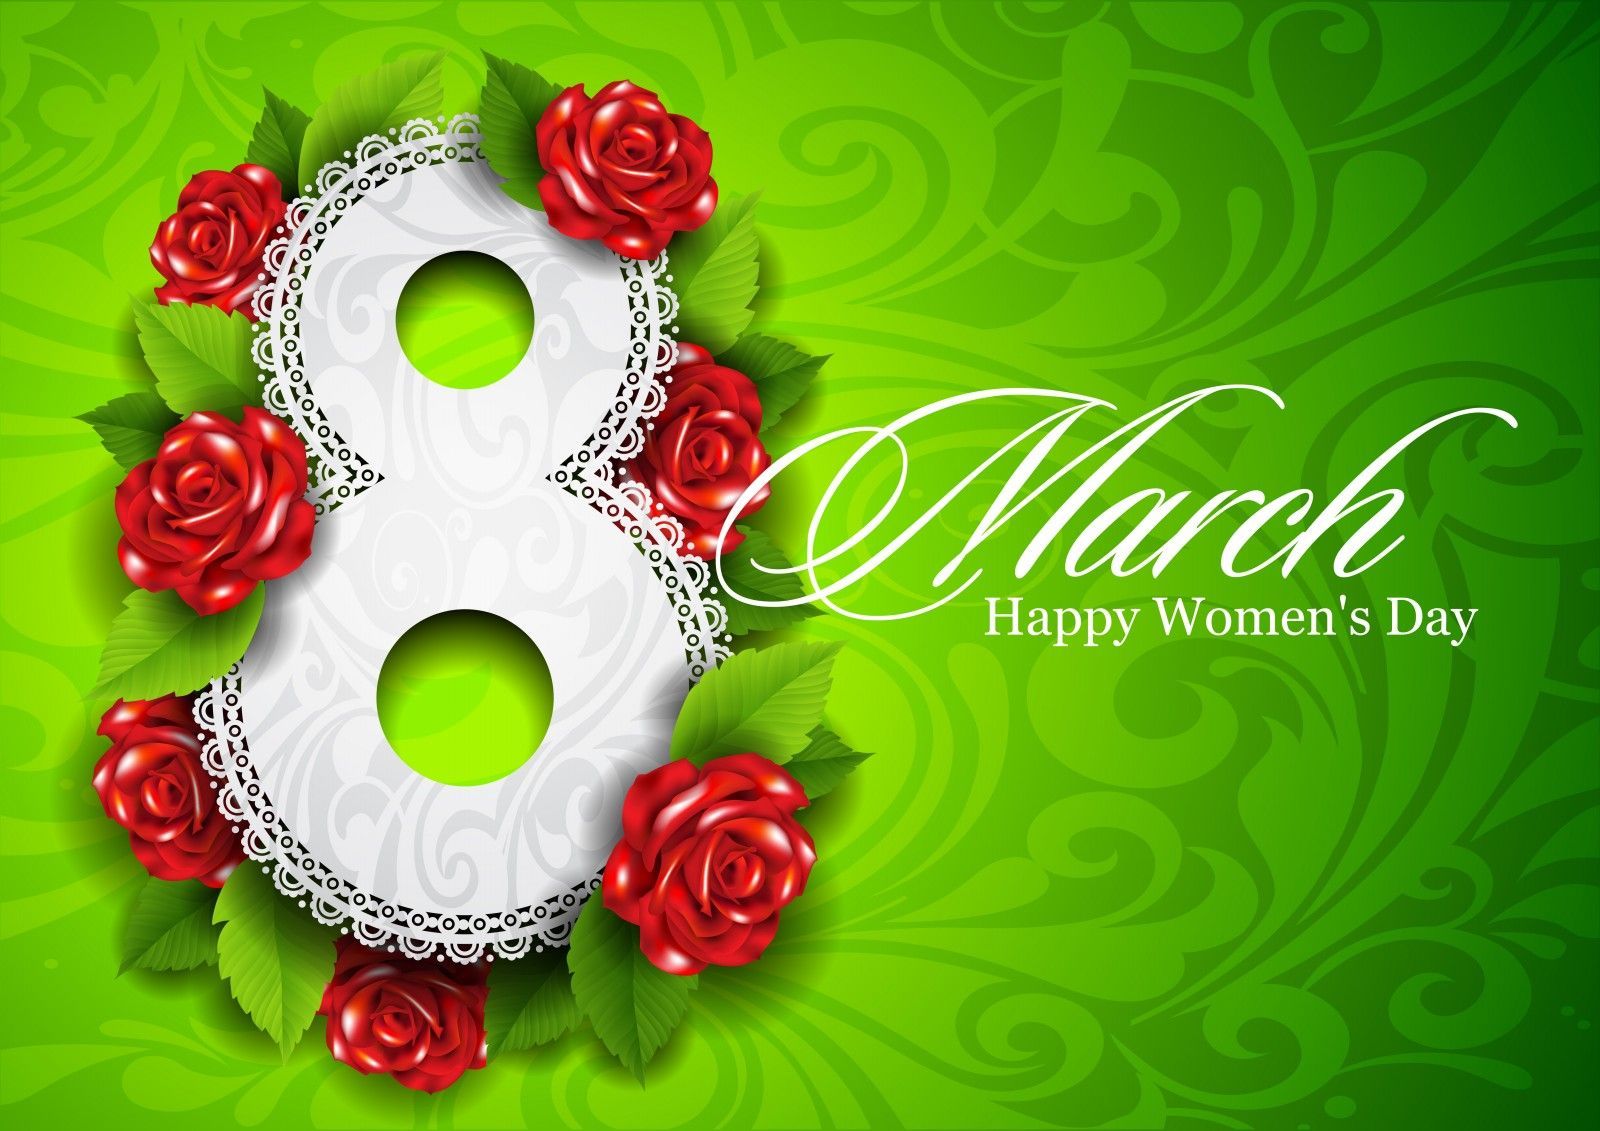 March Happy Womens Day wallpaper. Happy woman day, Woman day image, Ladies day